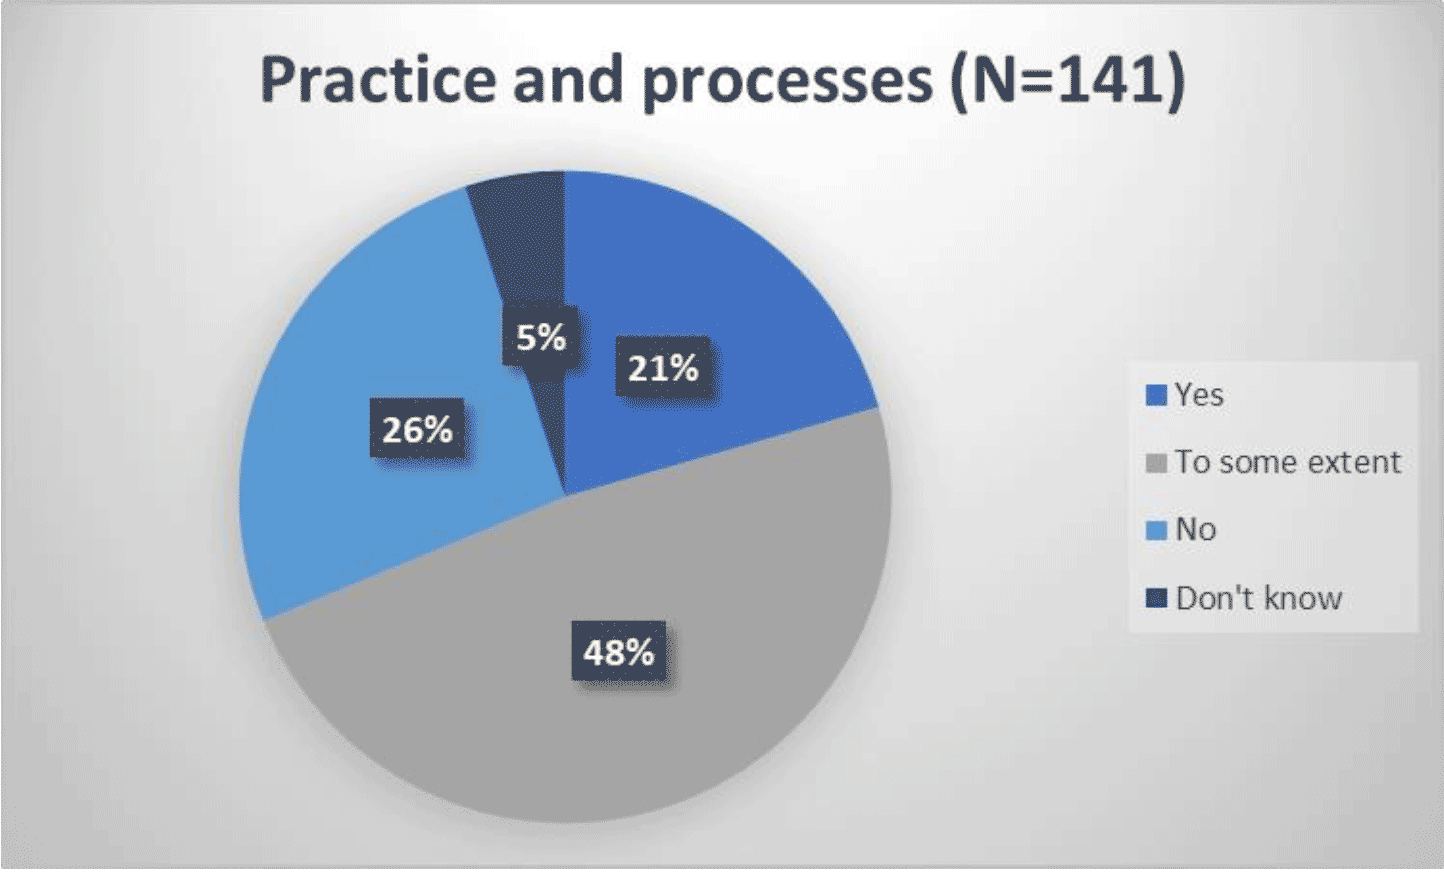 Pie chart showing responses to whether there are practices or processes that are not fully described in the guidance:
Yes 21%
To some extent 48%
No 26%
Don't know 5%